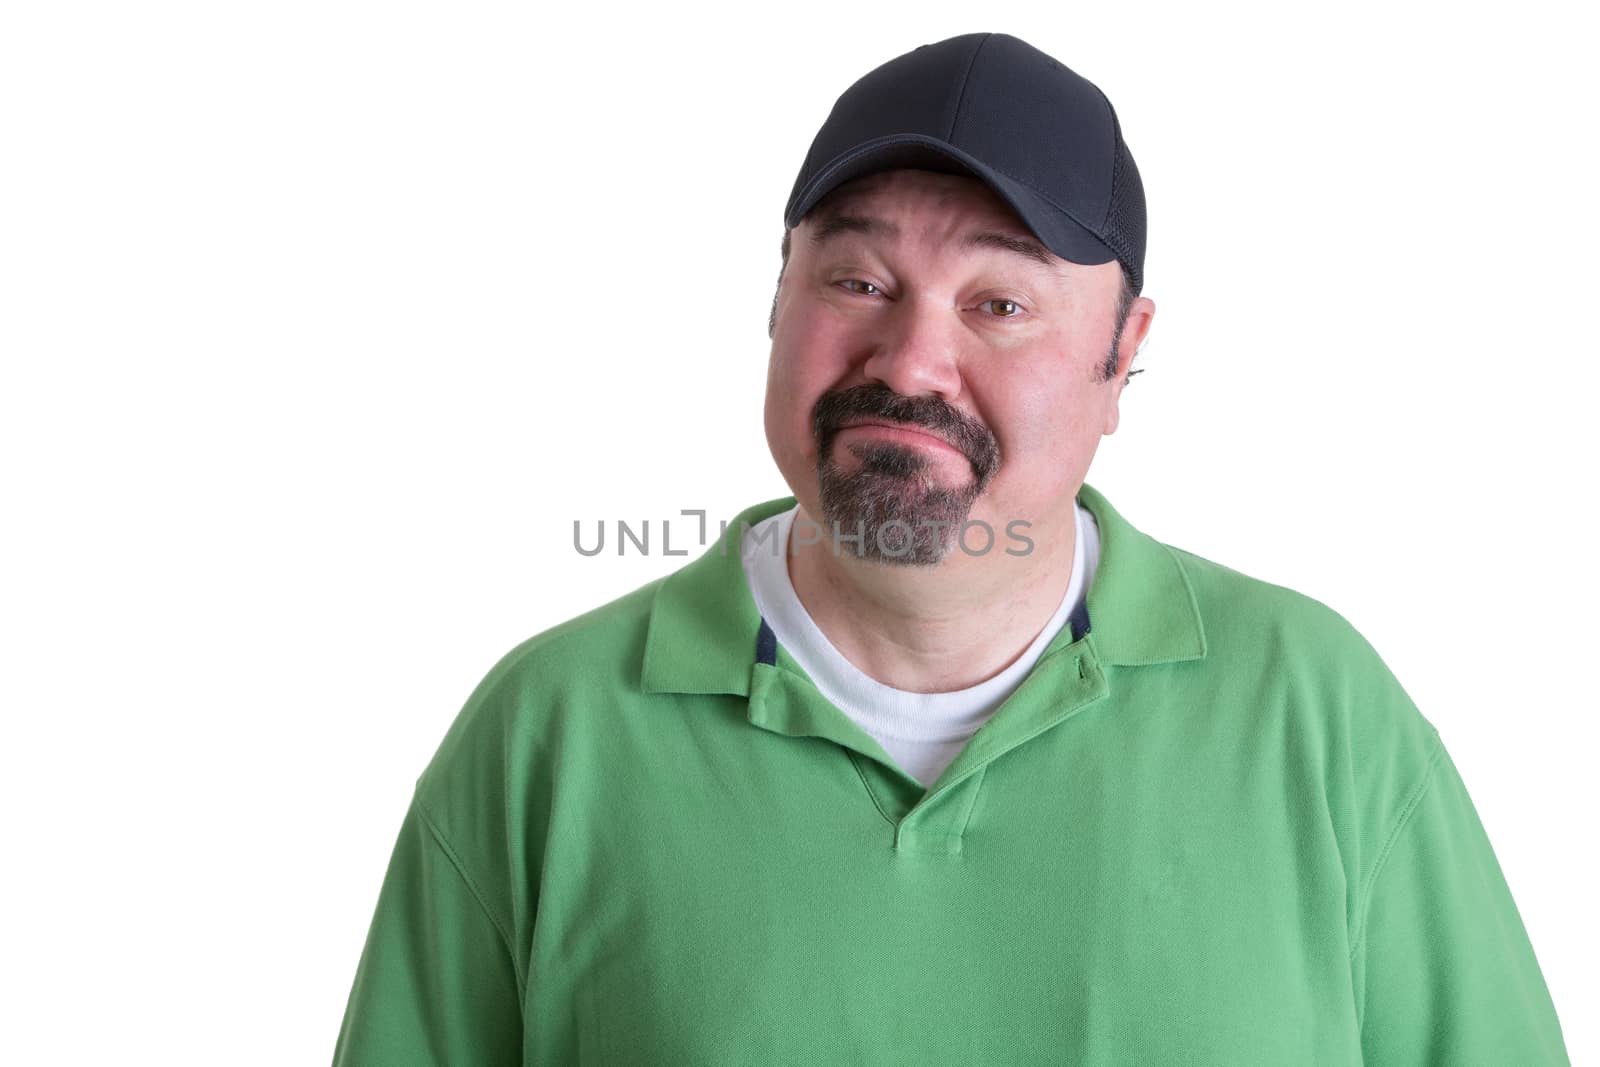 Portrait of a Bearded Adult Man in Green Shirt with Cap Got Emotional Face While Looking at the Camera. Isolated on White Background.